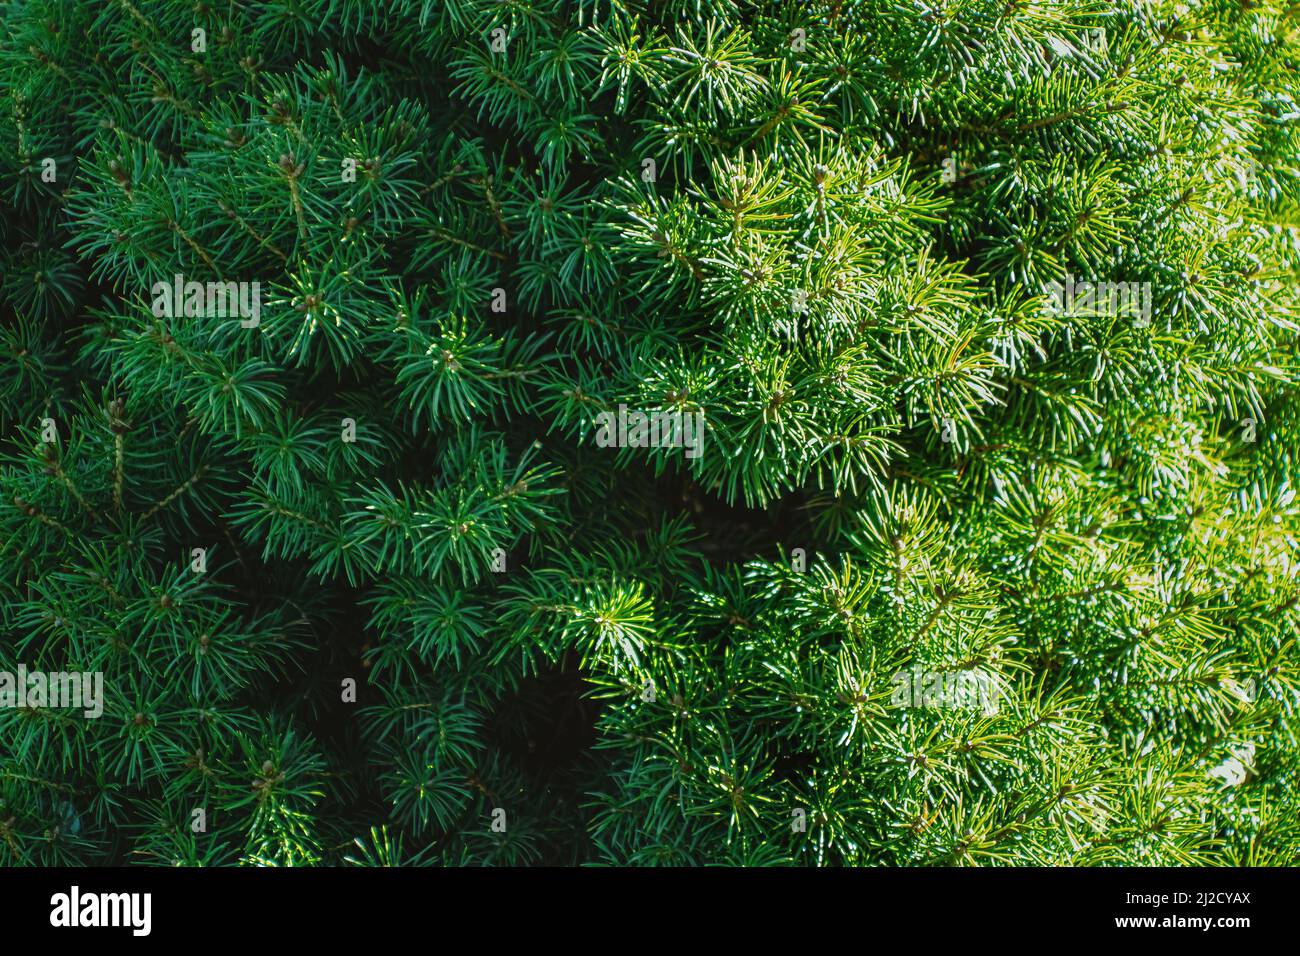 The sun lights up half the tree with the other half being darkened with shadow. A view of picea glauca. Stock Photo